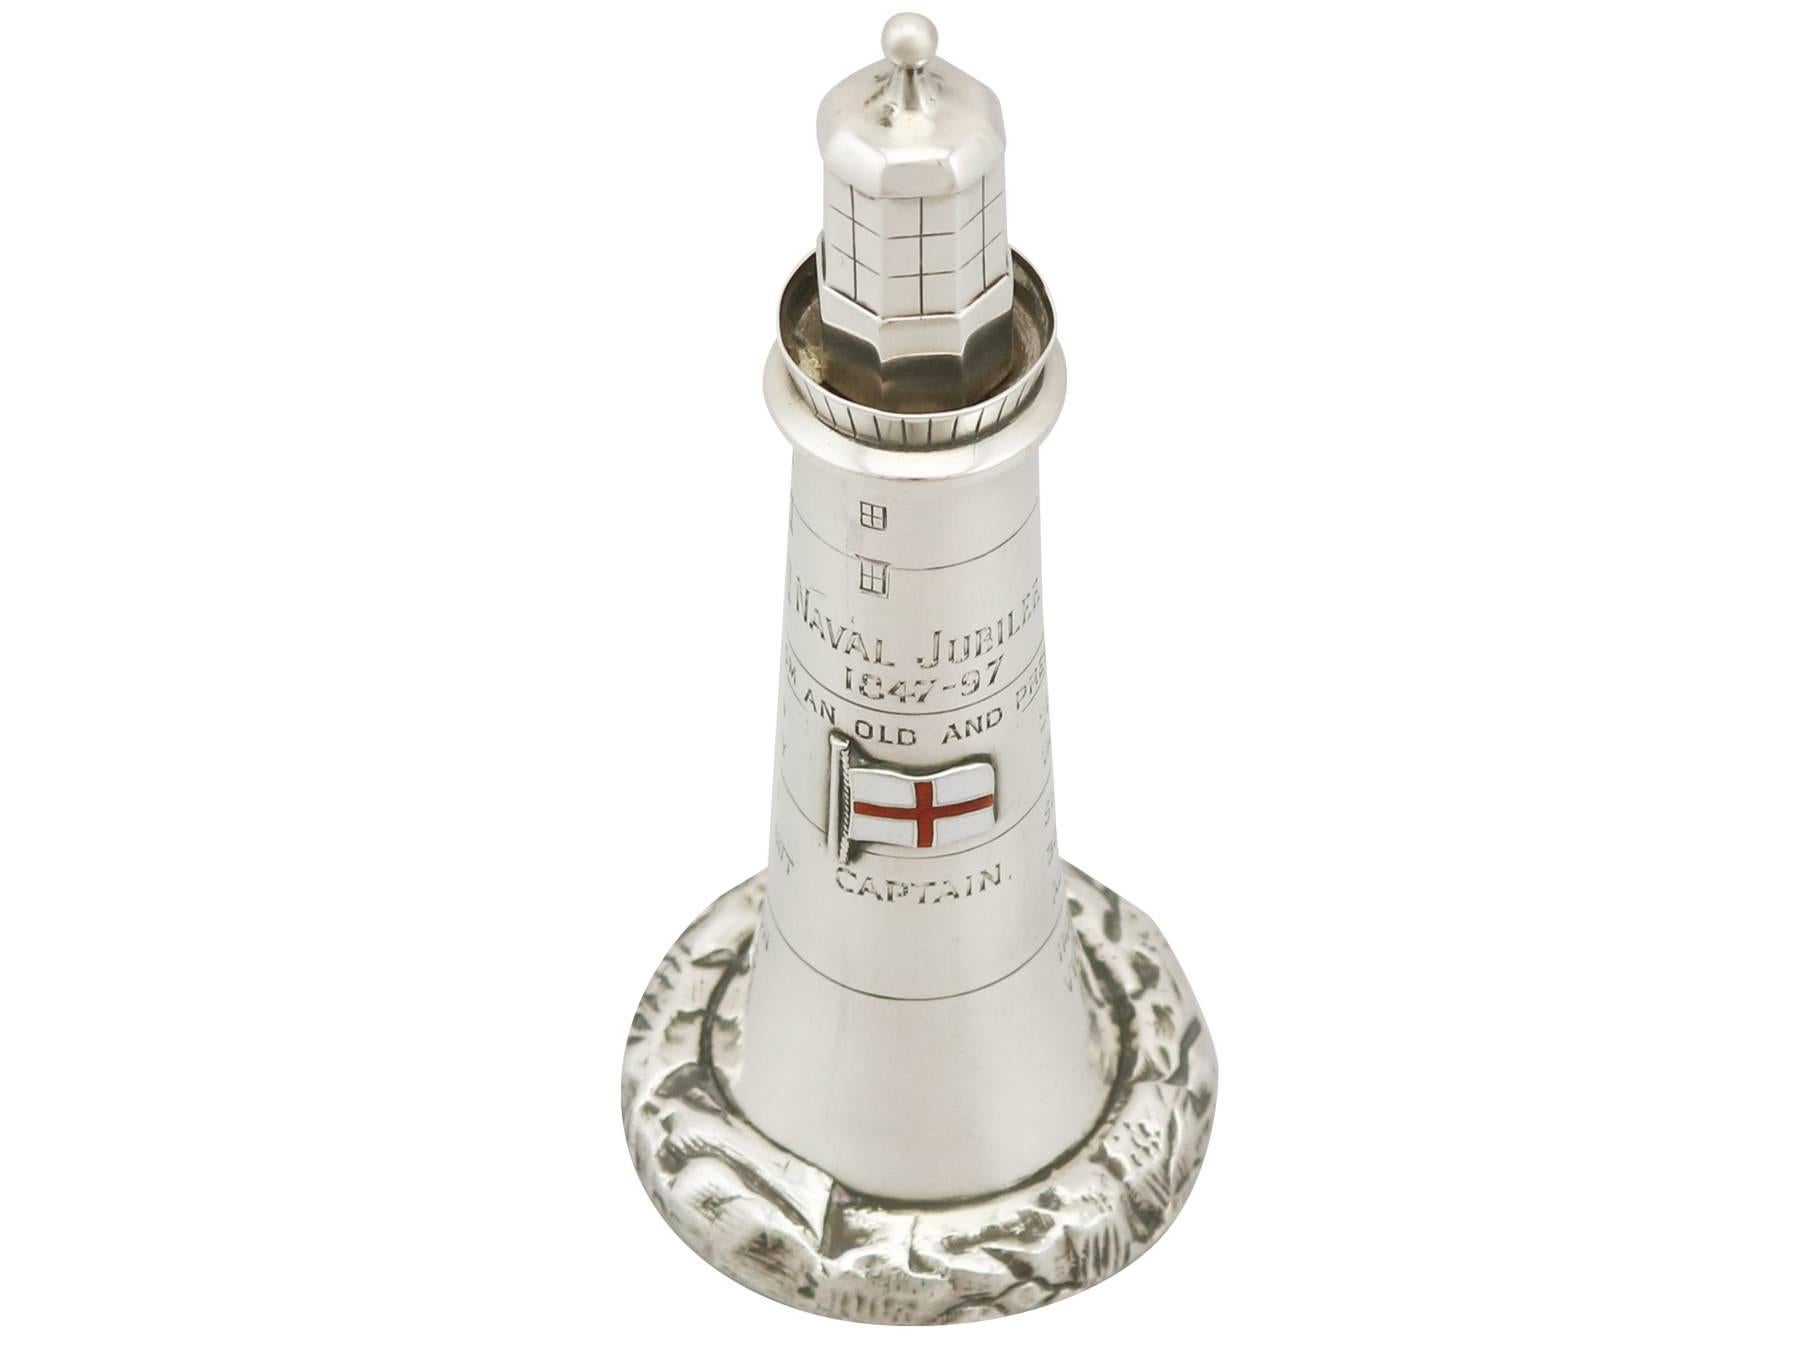 An exceptional, fine and impressive antique Victorian English sterling silver and enamel table lighter modelled in the form of a lighthouse; an addition to our maritime silverware collection.

This exceptional antique Victorian sterling silver